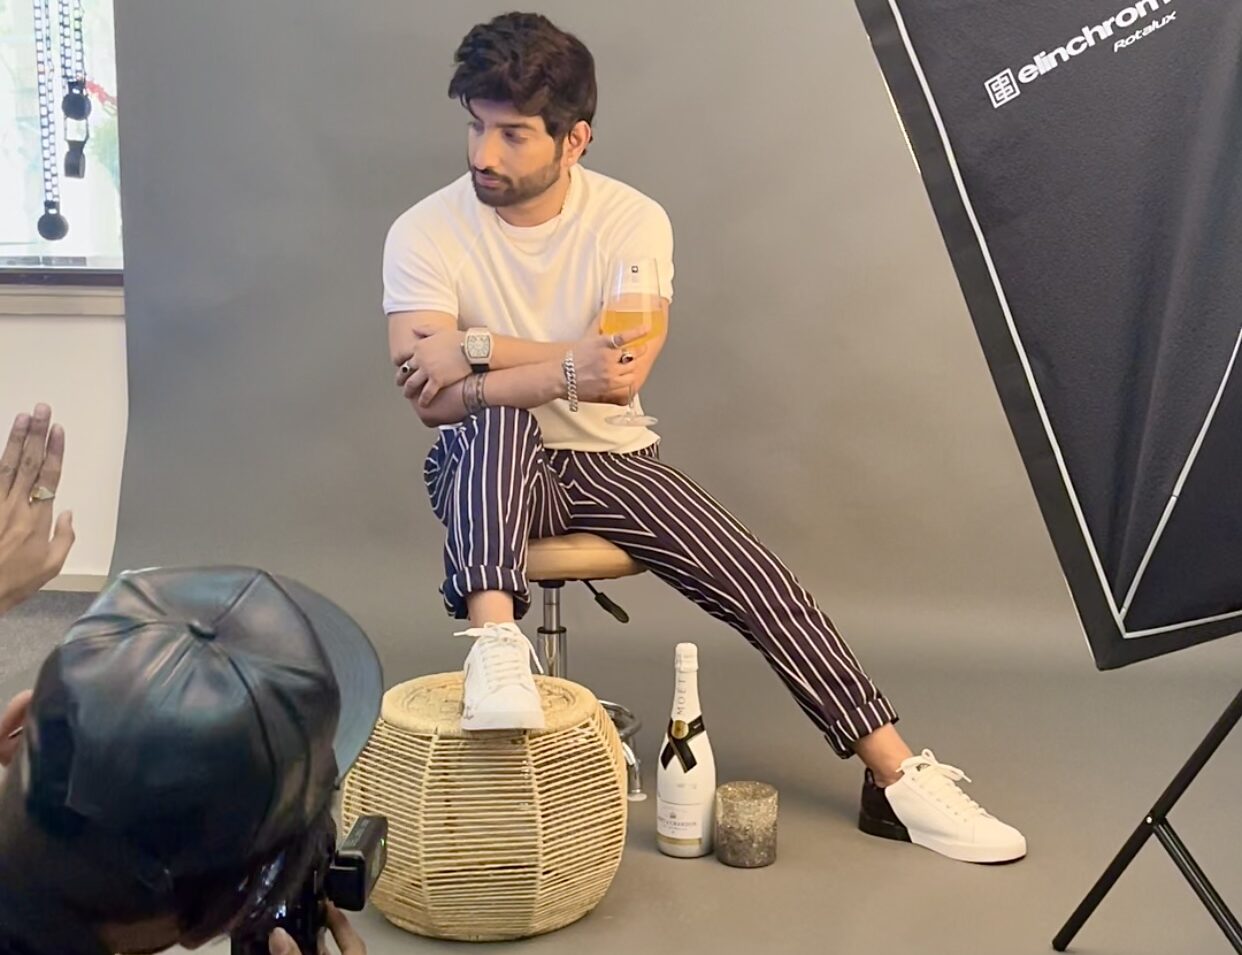 Delhi’s inspiring Influencer Ddeev Banerjee Came up together with his new photoshoot in collaboration with Zoafshen Qureshi.